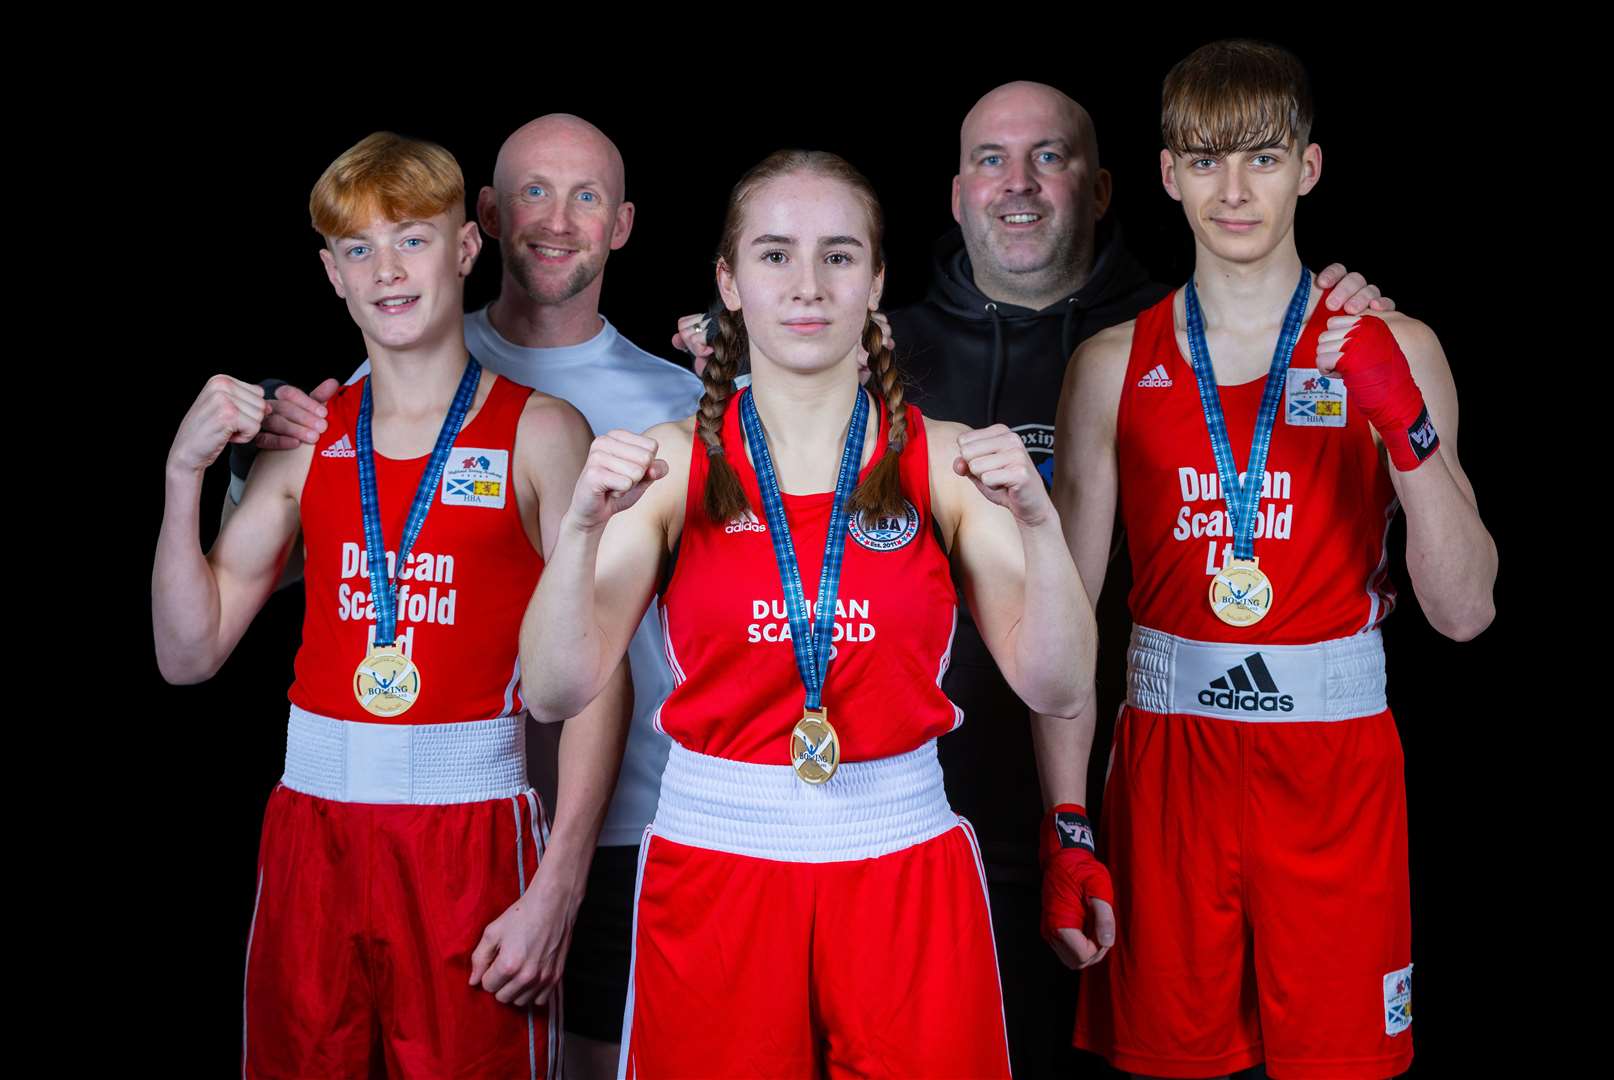 Rio Peden (48kg Champion), Isabella Fioretti (63kg Champion) and Josh Burnside (57kg Champion) with Highland Boxing Academy (HBA) coaches Barry Morrison and Liam Foy after a successful 2023 Development Championships.